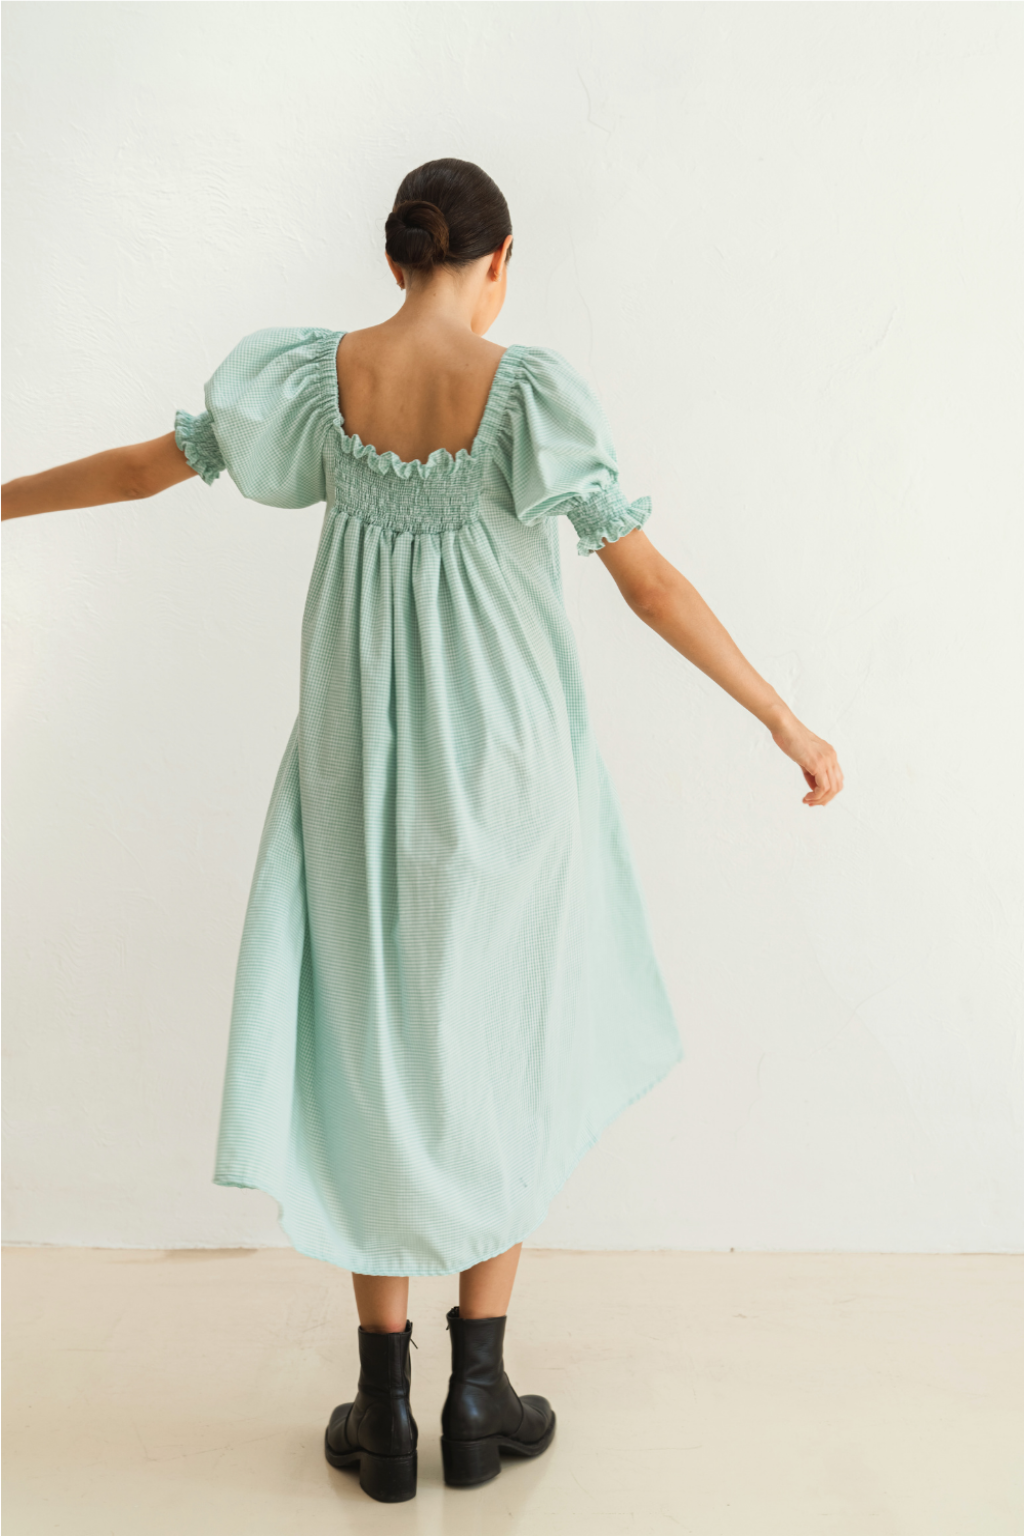 Madera Dress in Mint Gingham